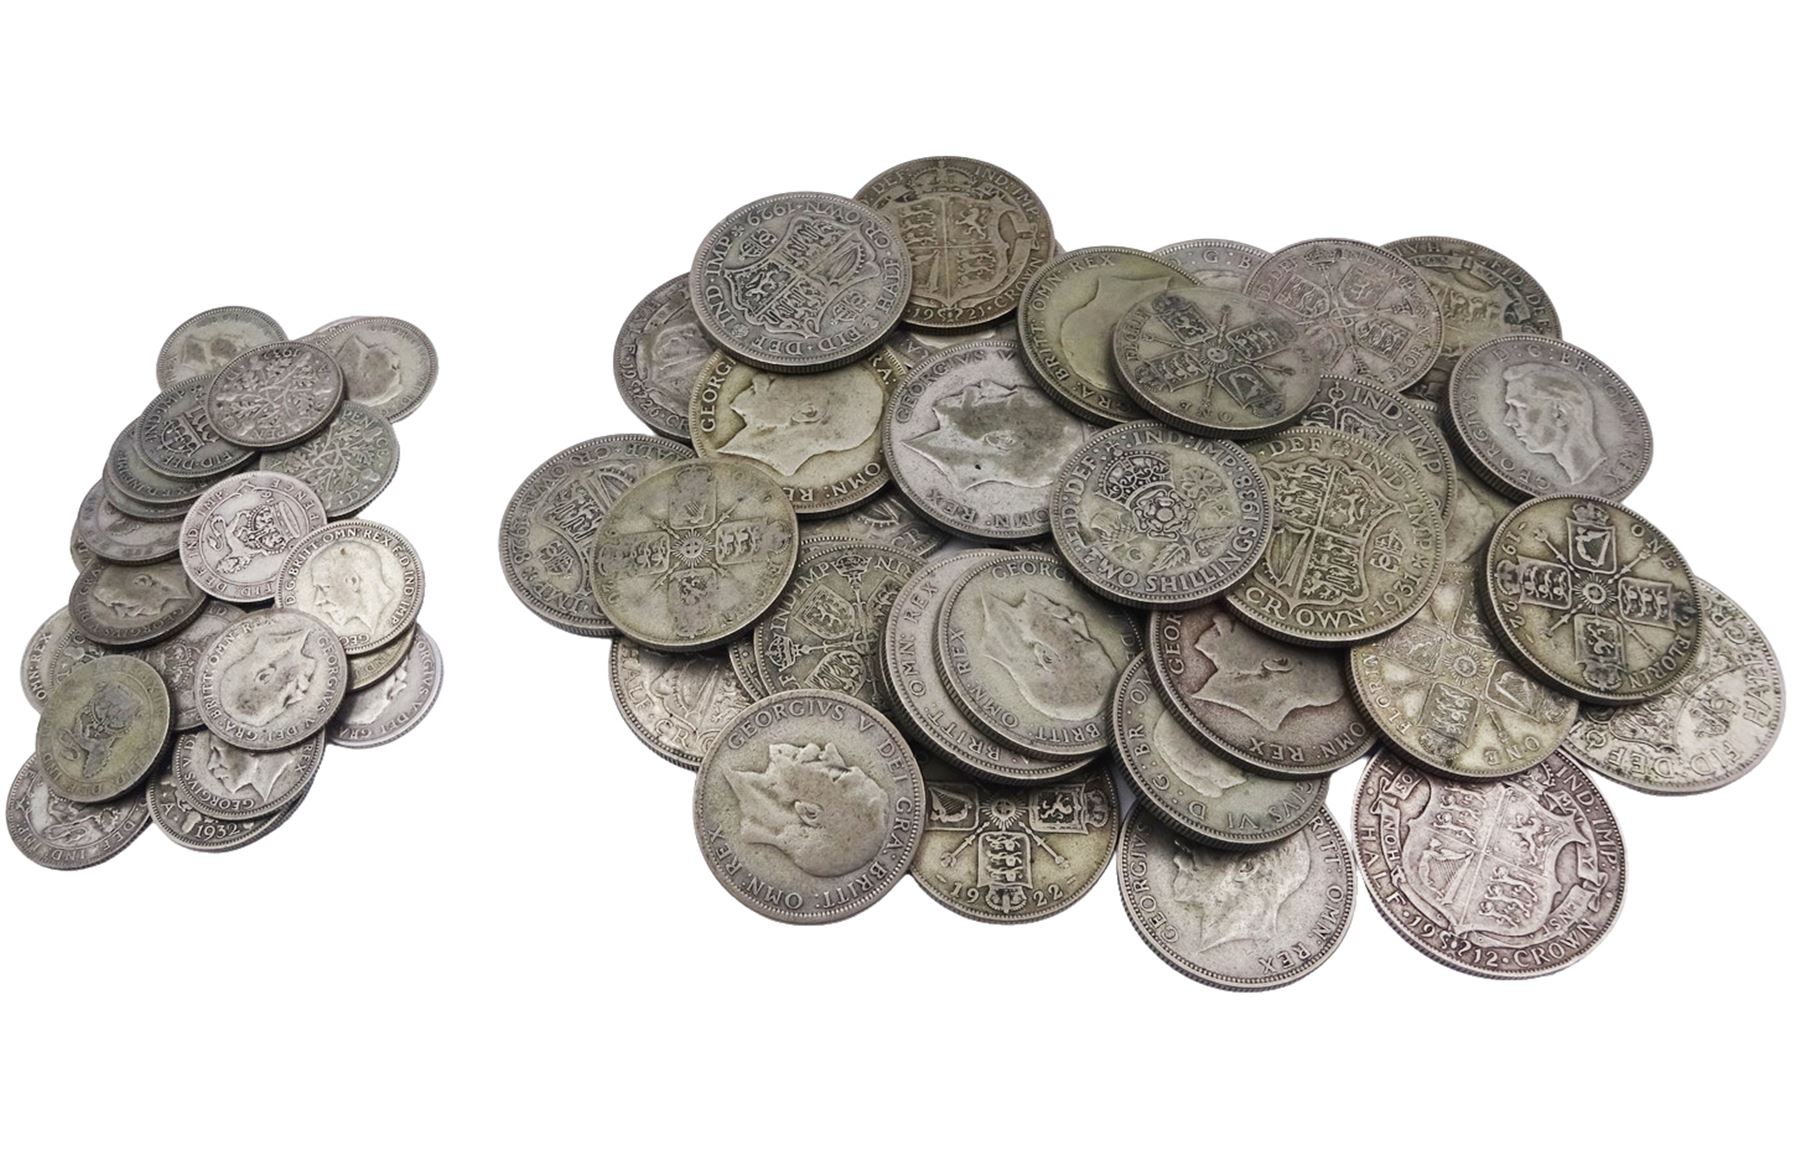 Approximately 563 grams of Great British pre 1947 silver coins